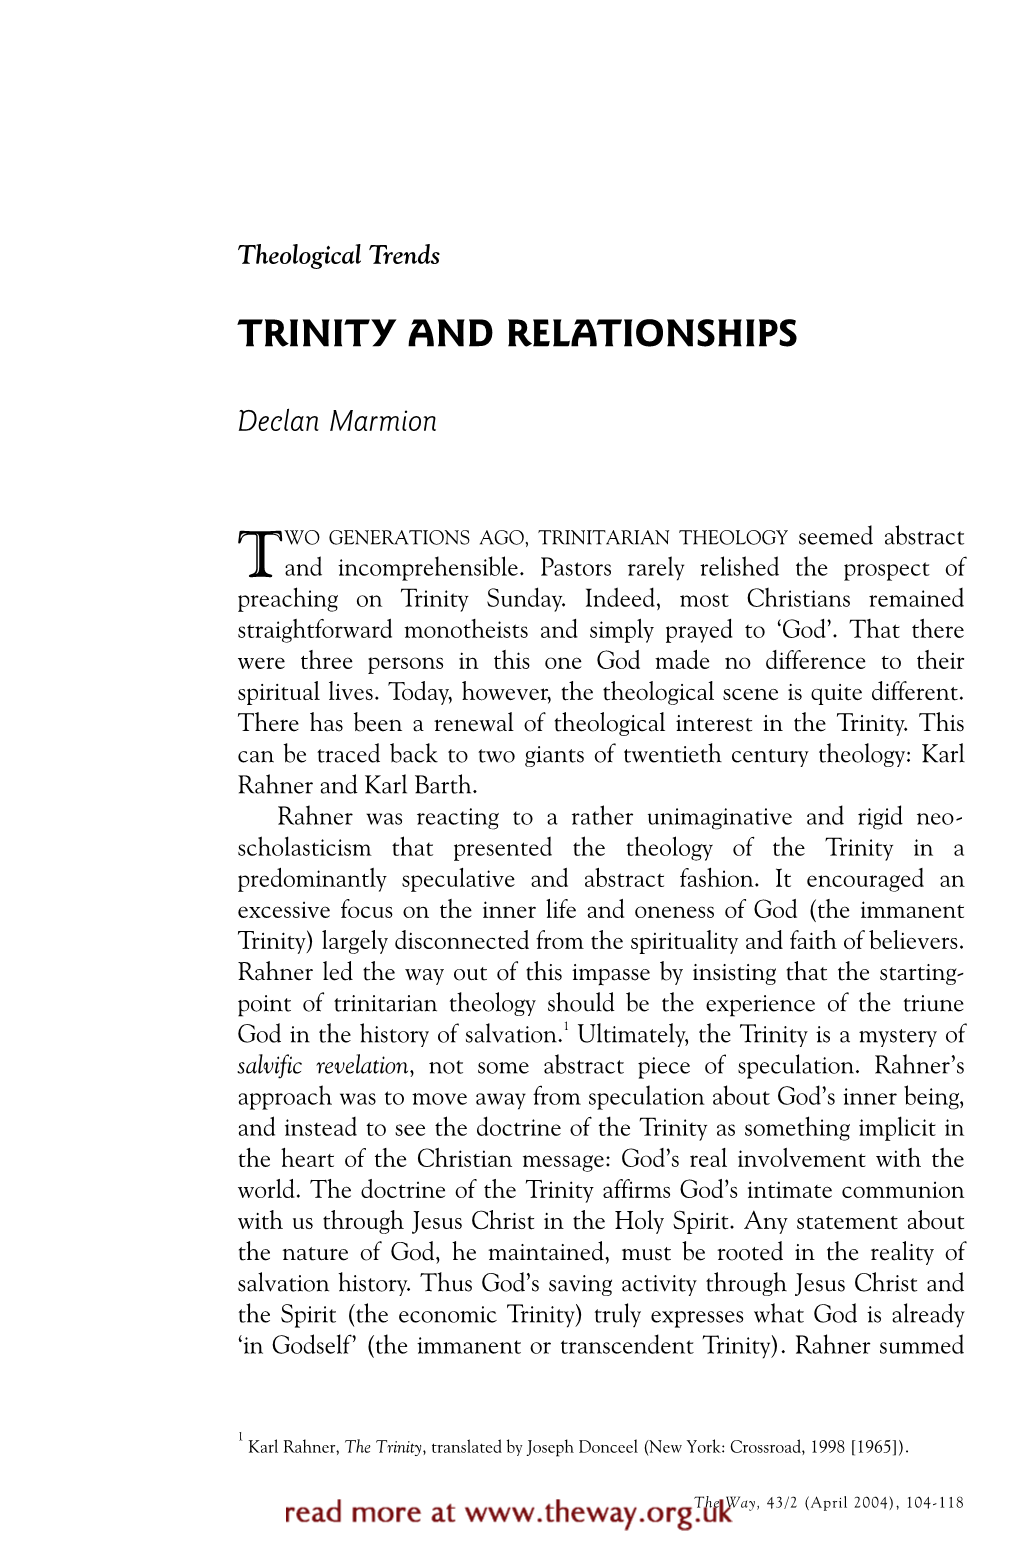 Trinity and Relationships